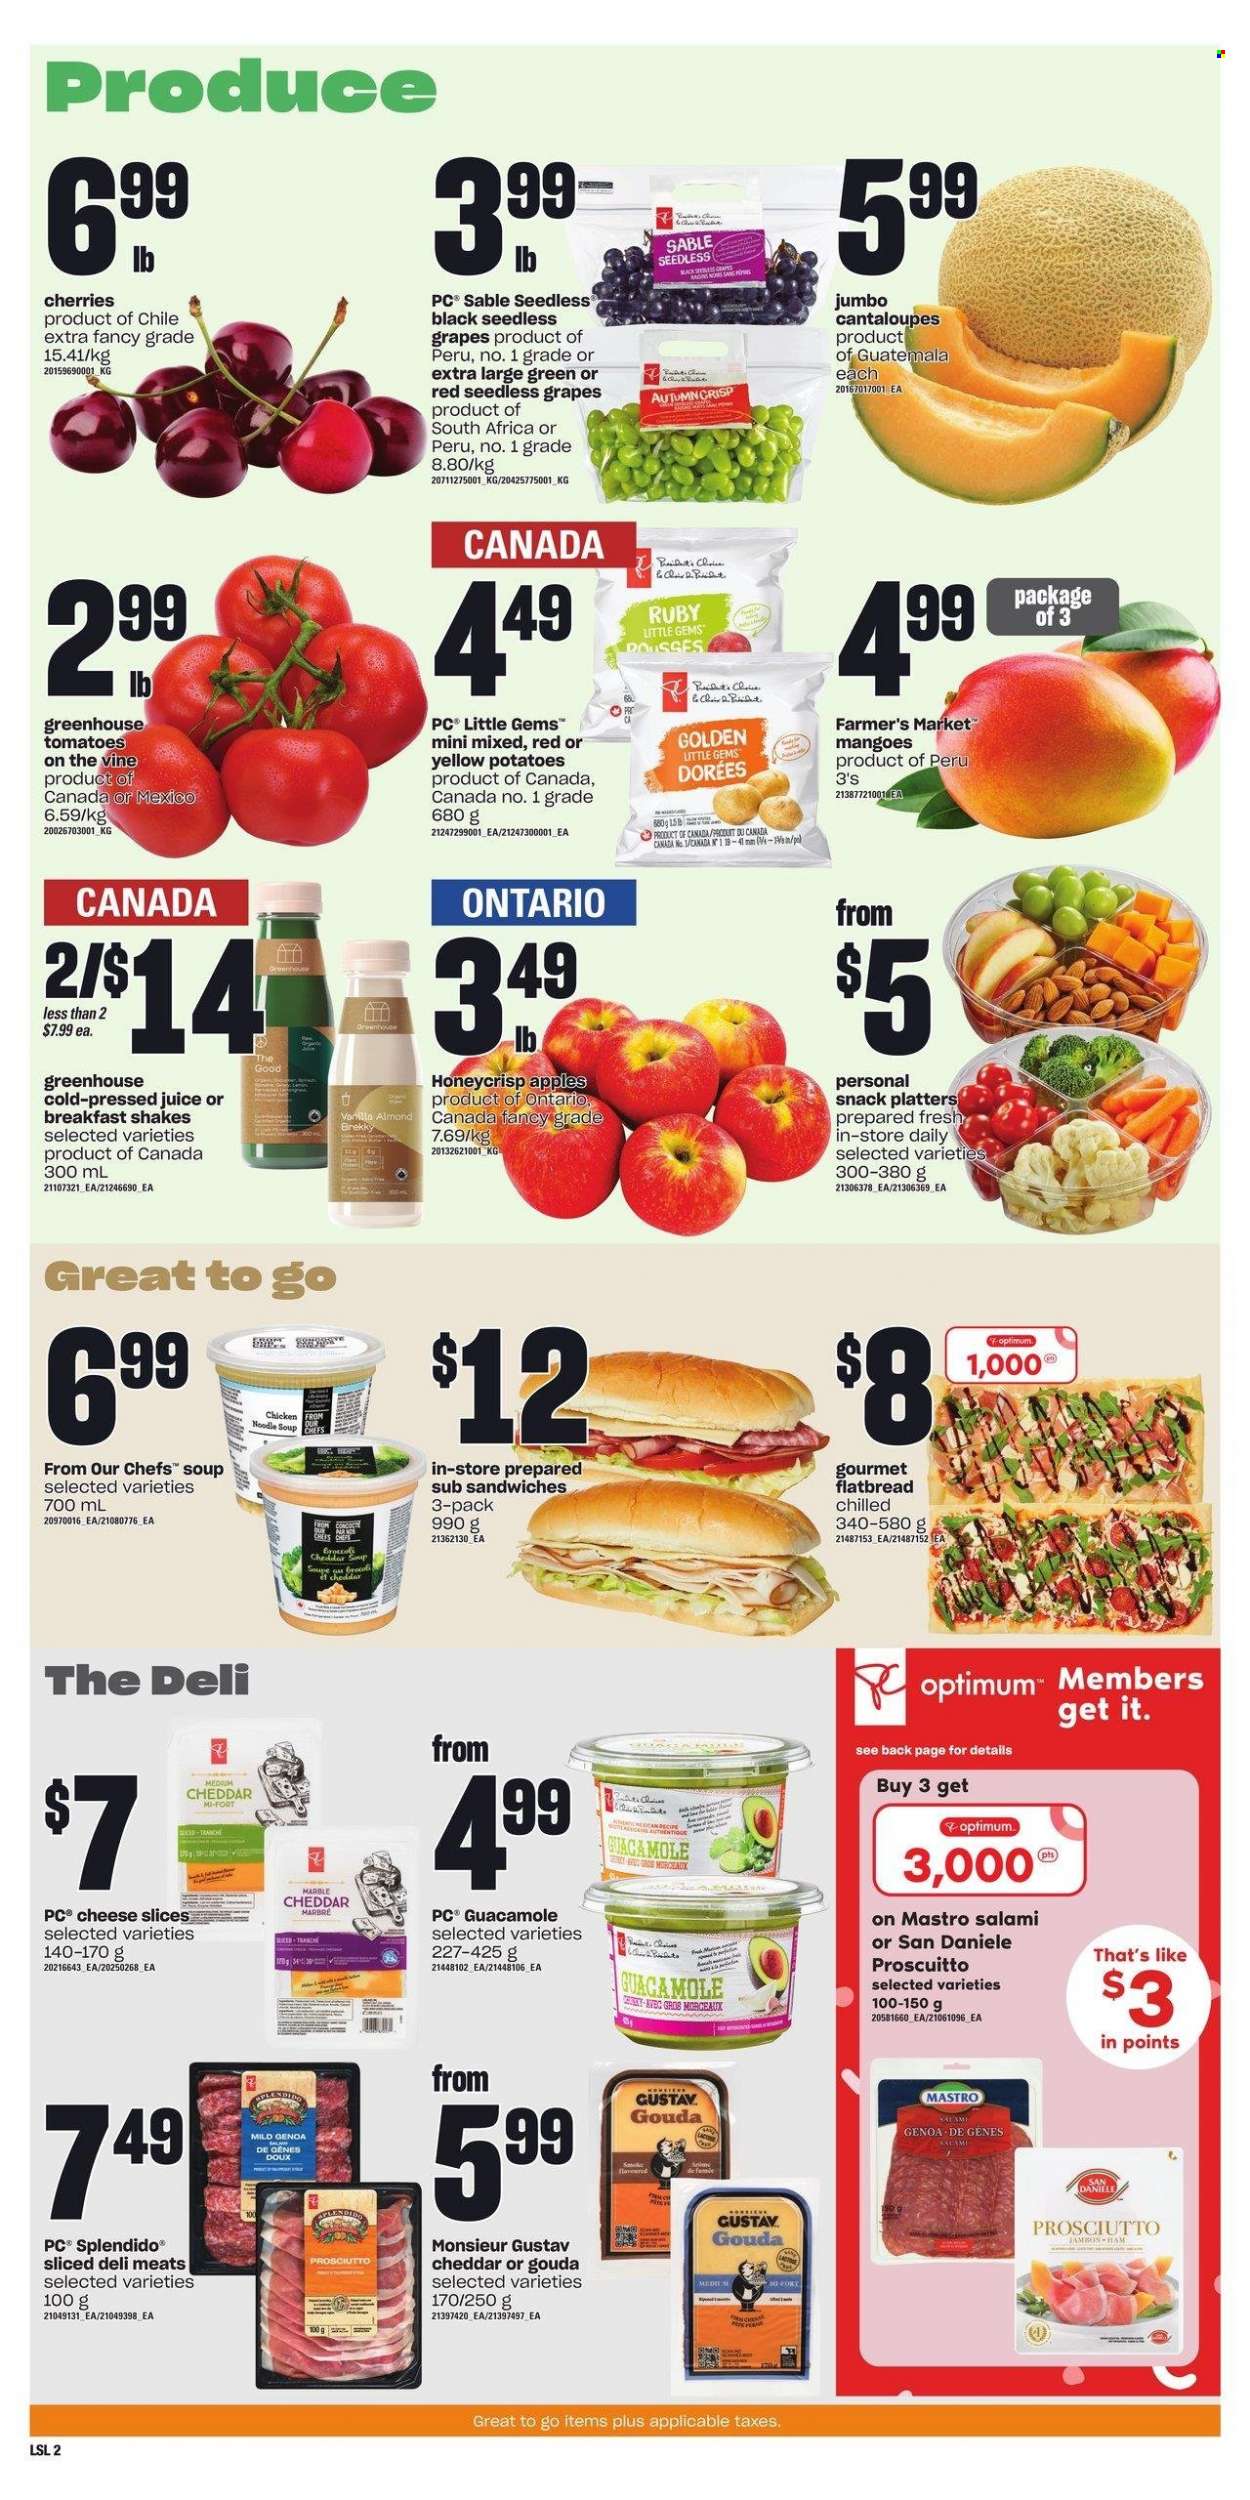 thumbnail - Loblaws Flyer - January 26, 2023 - February 01, 2023 - Sales products - flatbread, cantaloupe, tomatoes, potatoes, apples, grapes, mango, seedless grapes, cherries, soup, noodles cup, noodles, salami, ham, prosciutto, guacamole, gouda, sliced cheese, cheddar, cheese, shake, juice, Optimum. Page 3.